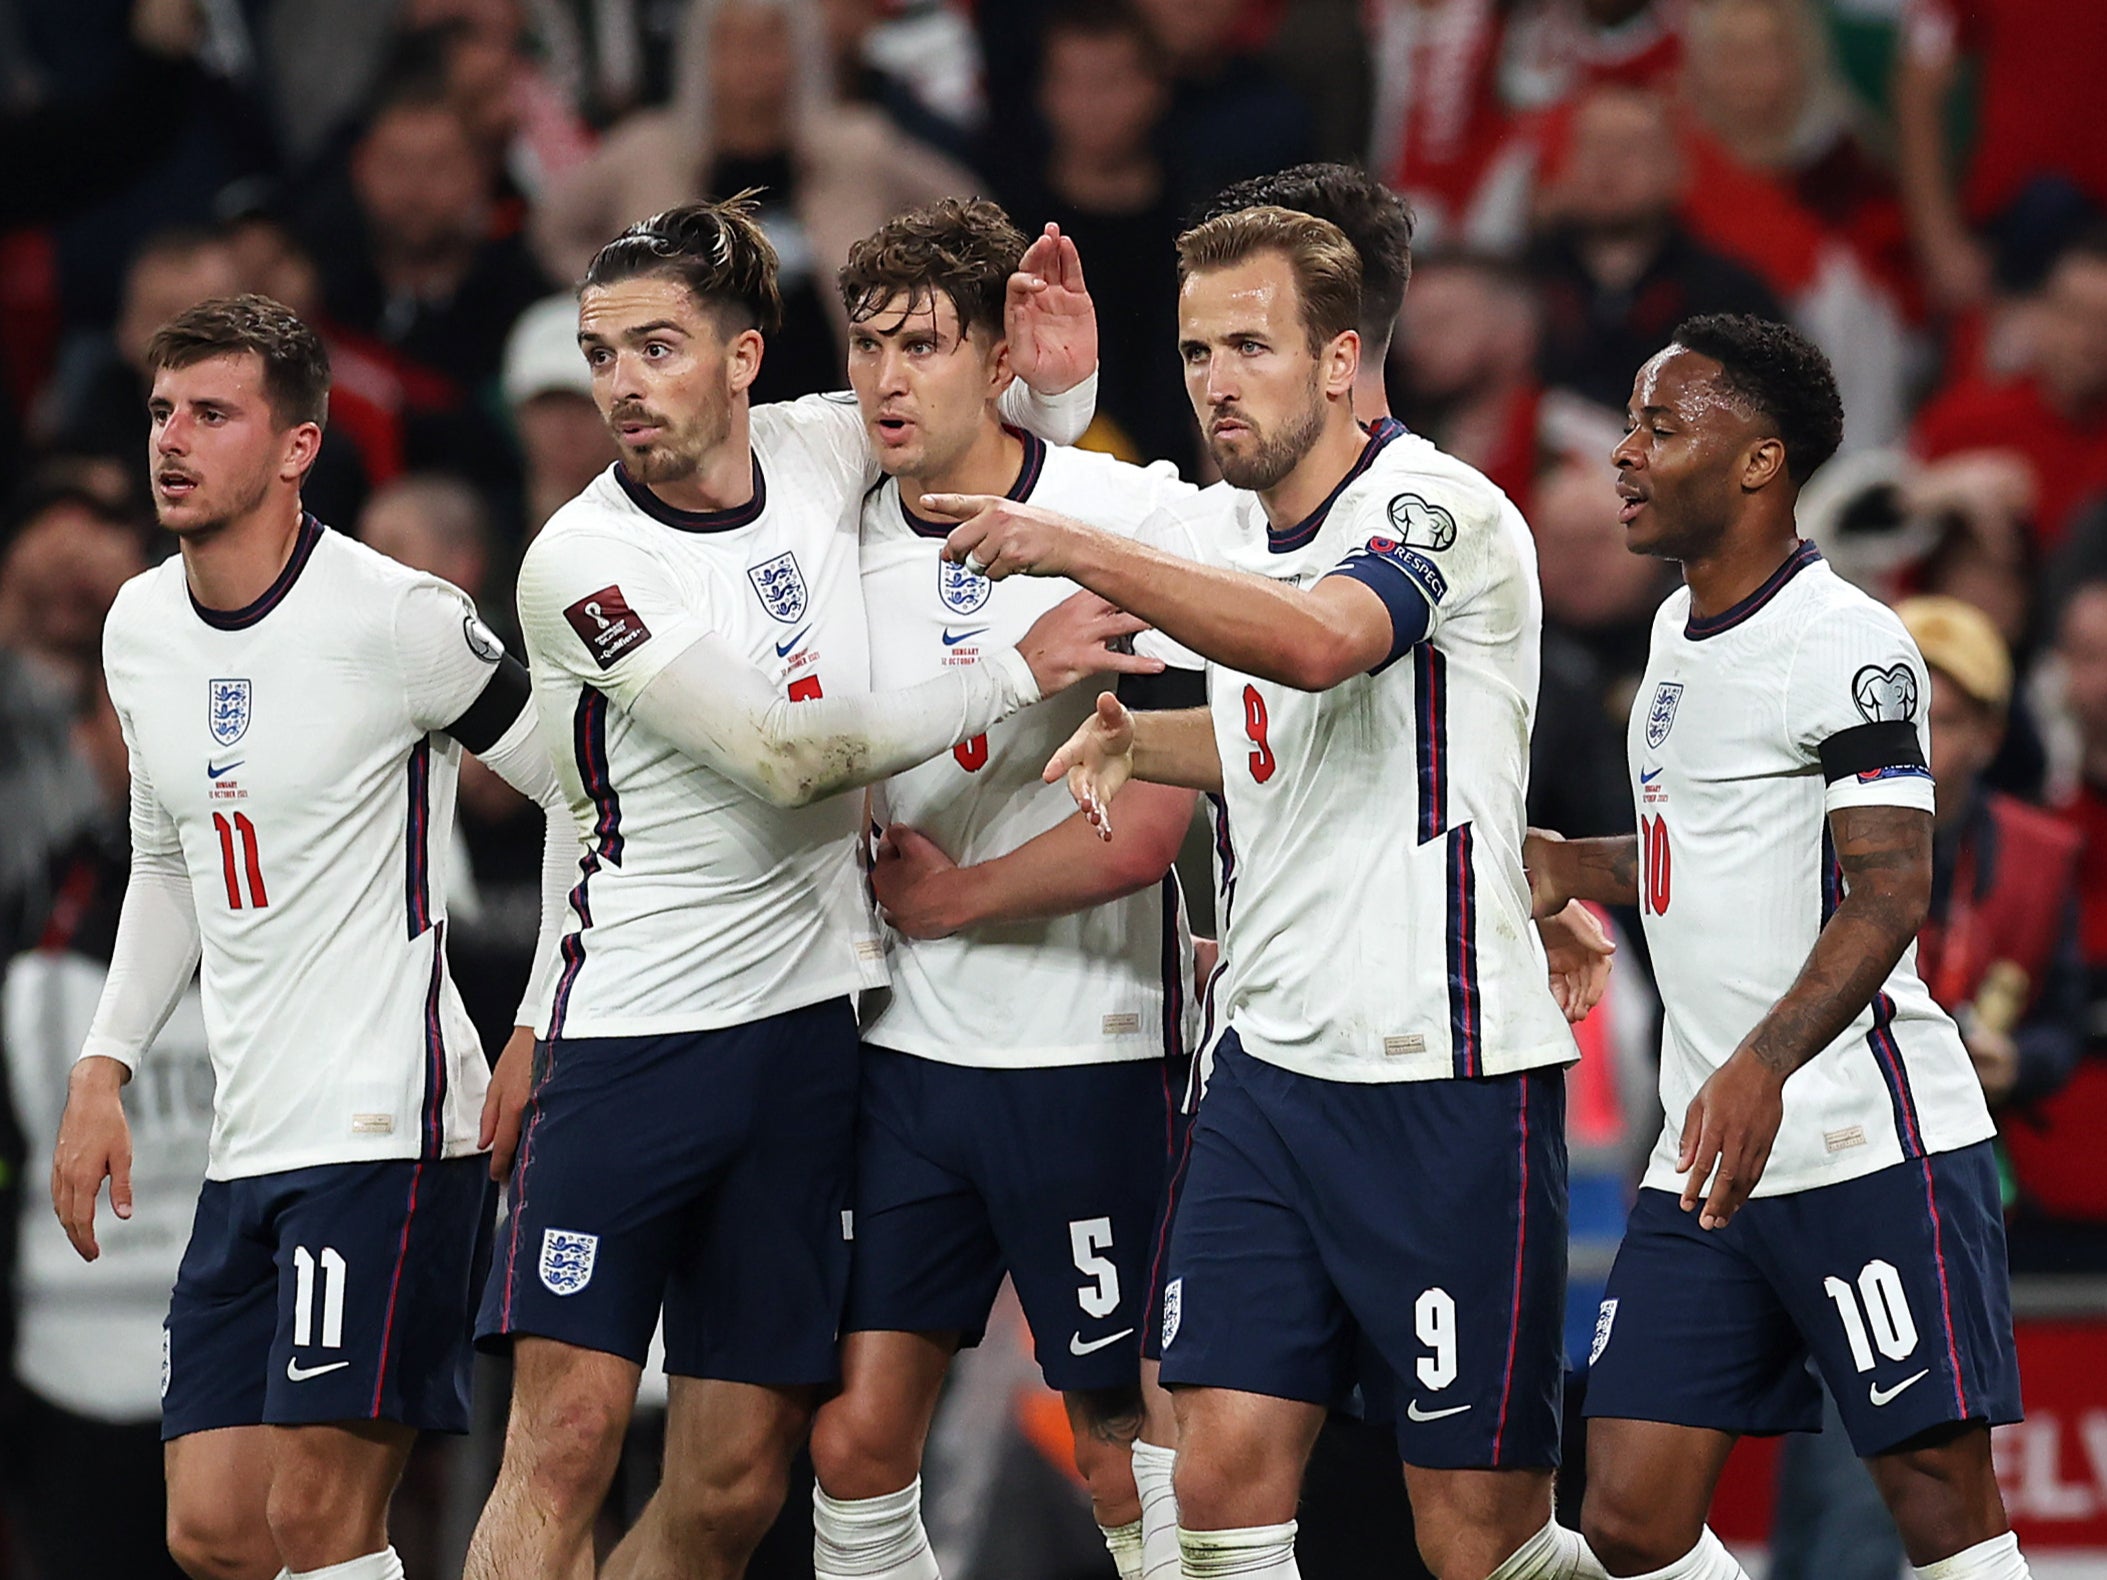 England are in pole position to qualify top of Group I